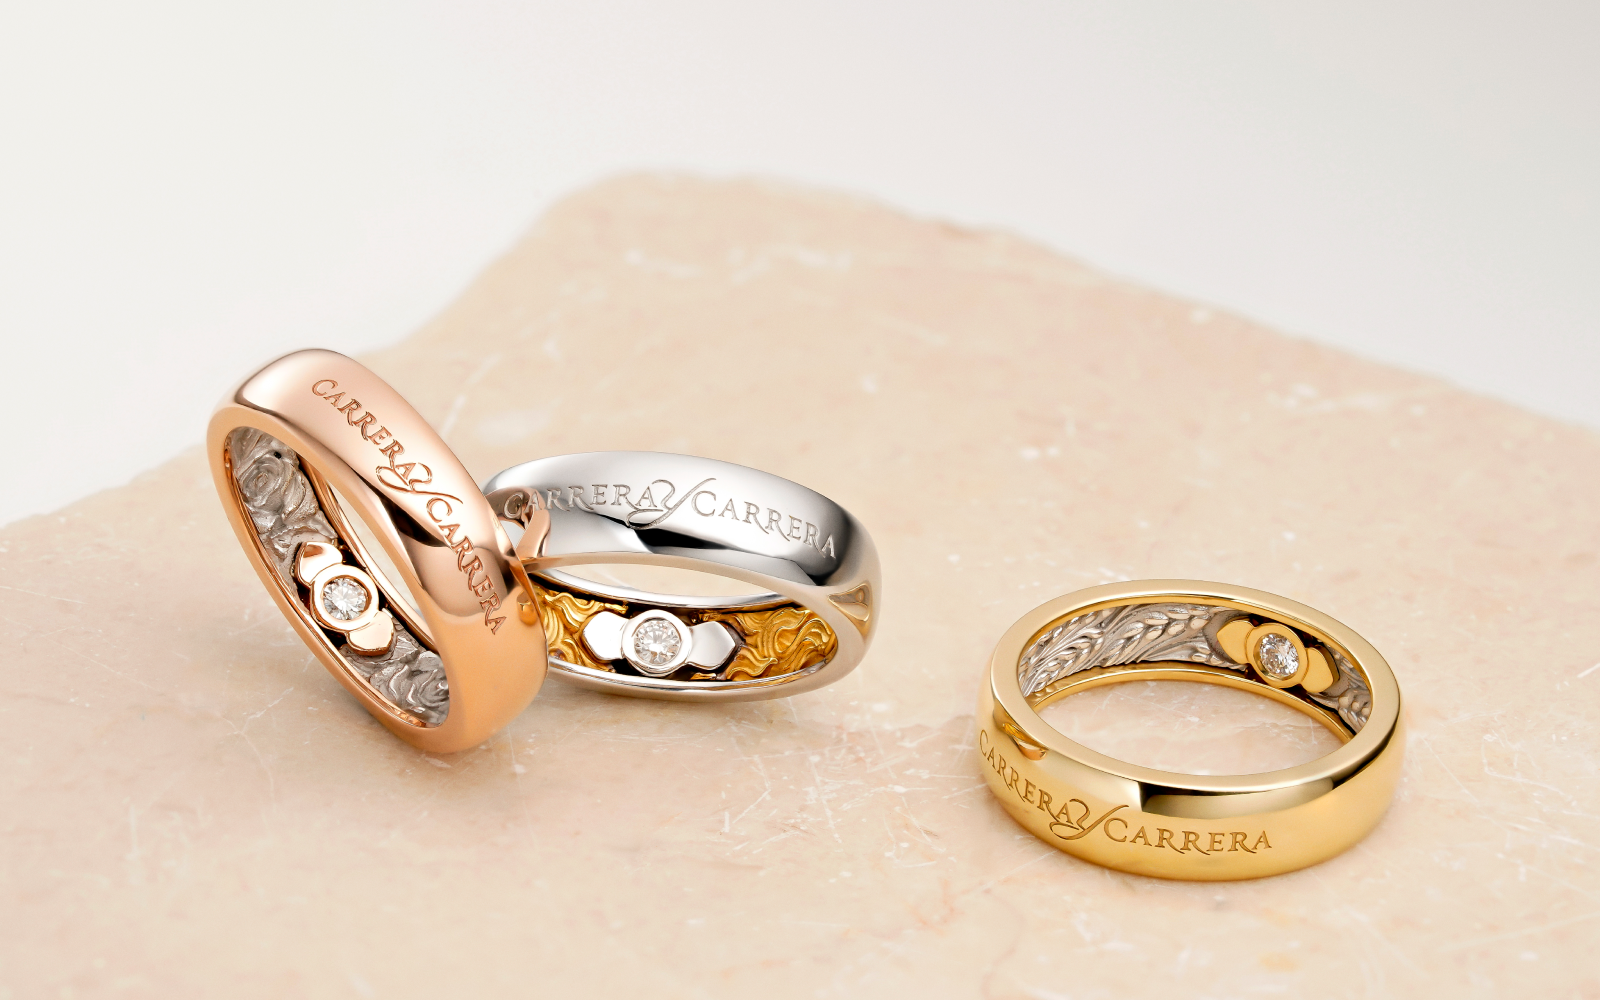 Carrera Y Carrera Beauty Inside rings in gold, white gold, rose gold and diamond from the Infinito collection